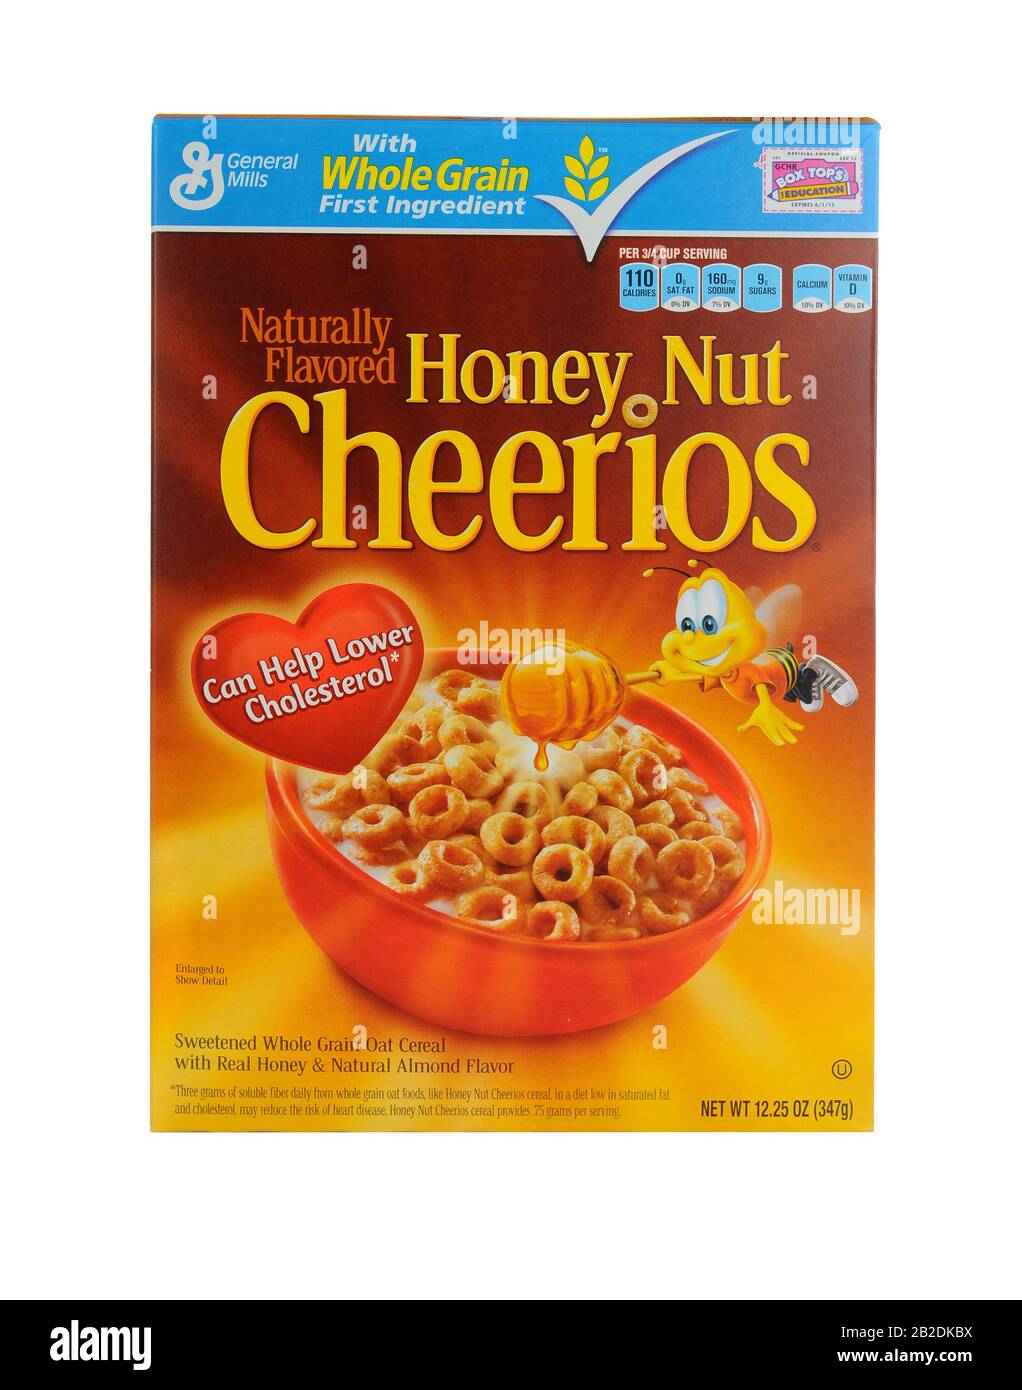 https://c8.alamy.com/comp/2B2DKBX/irvine-ca-january-11-2013-a-1225-oz-box-of-honey-nut-cheerios-introduced-in-1979-by-general-mills-it-is-a-slightly-sweeter-version-of-the-origi-2B2DKBX.jpg